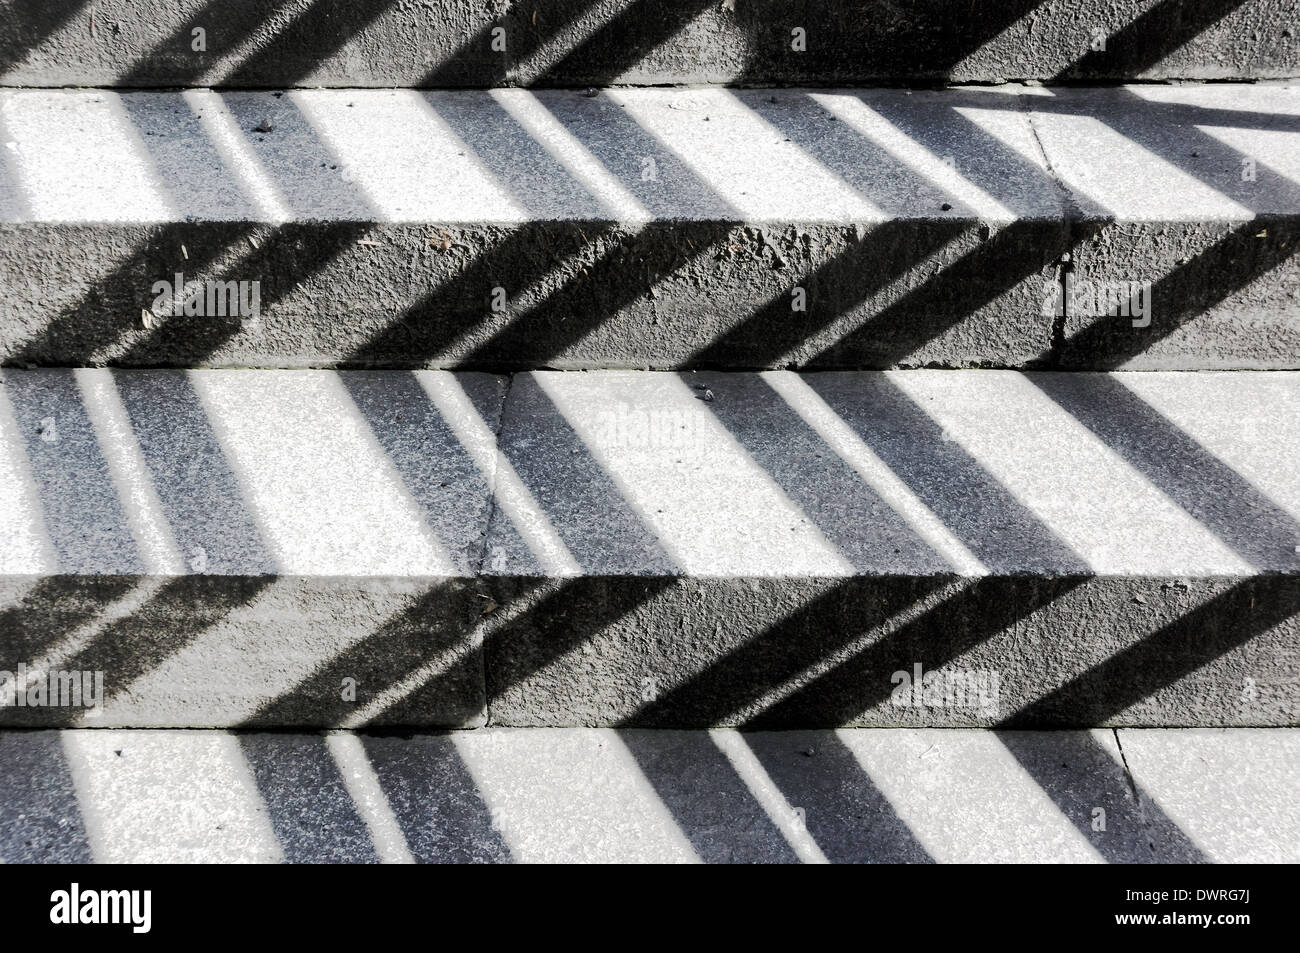 abstraction with stairs and shadows Stock Photo